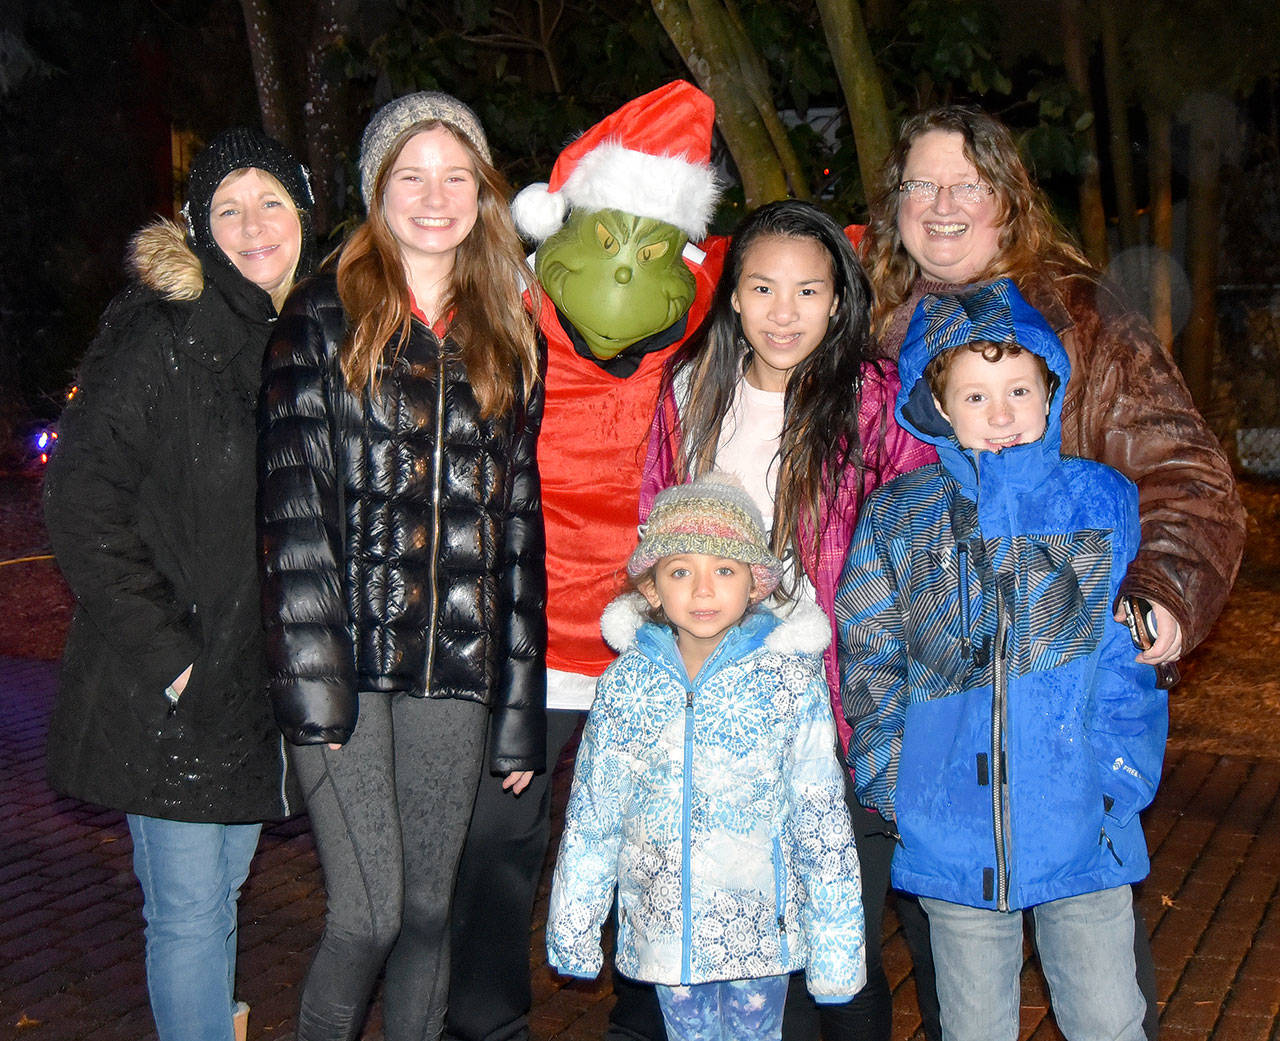 Sisters Pam and Susan Jones posed with their children and the Grinch at Snoqualmie’s holiday festival — an annual tradition for the two Snoqualmie Ridge families. (Carol Ladwig/Staff Photo)